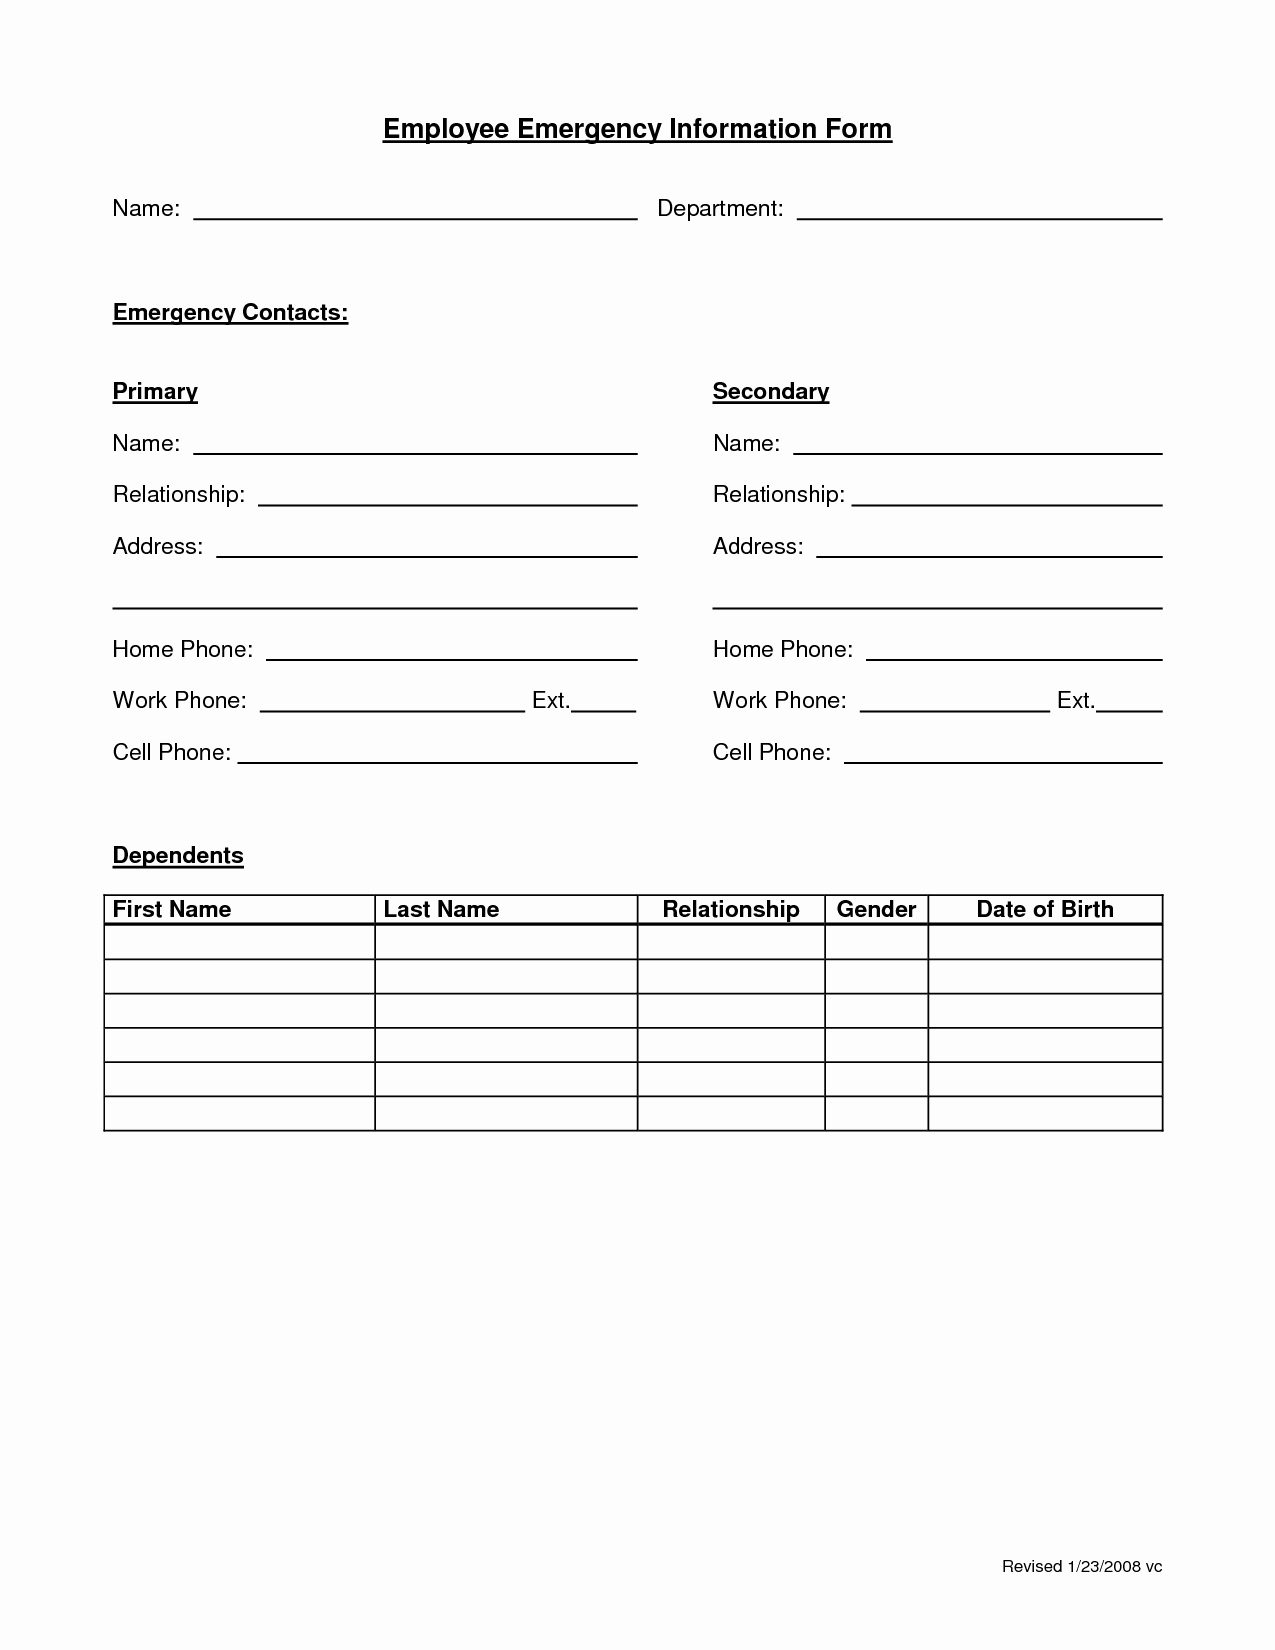 Employee Emergency Contact form Template Best Of Employee Emergency form Employee forms